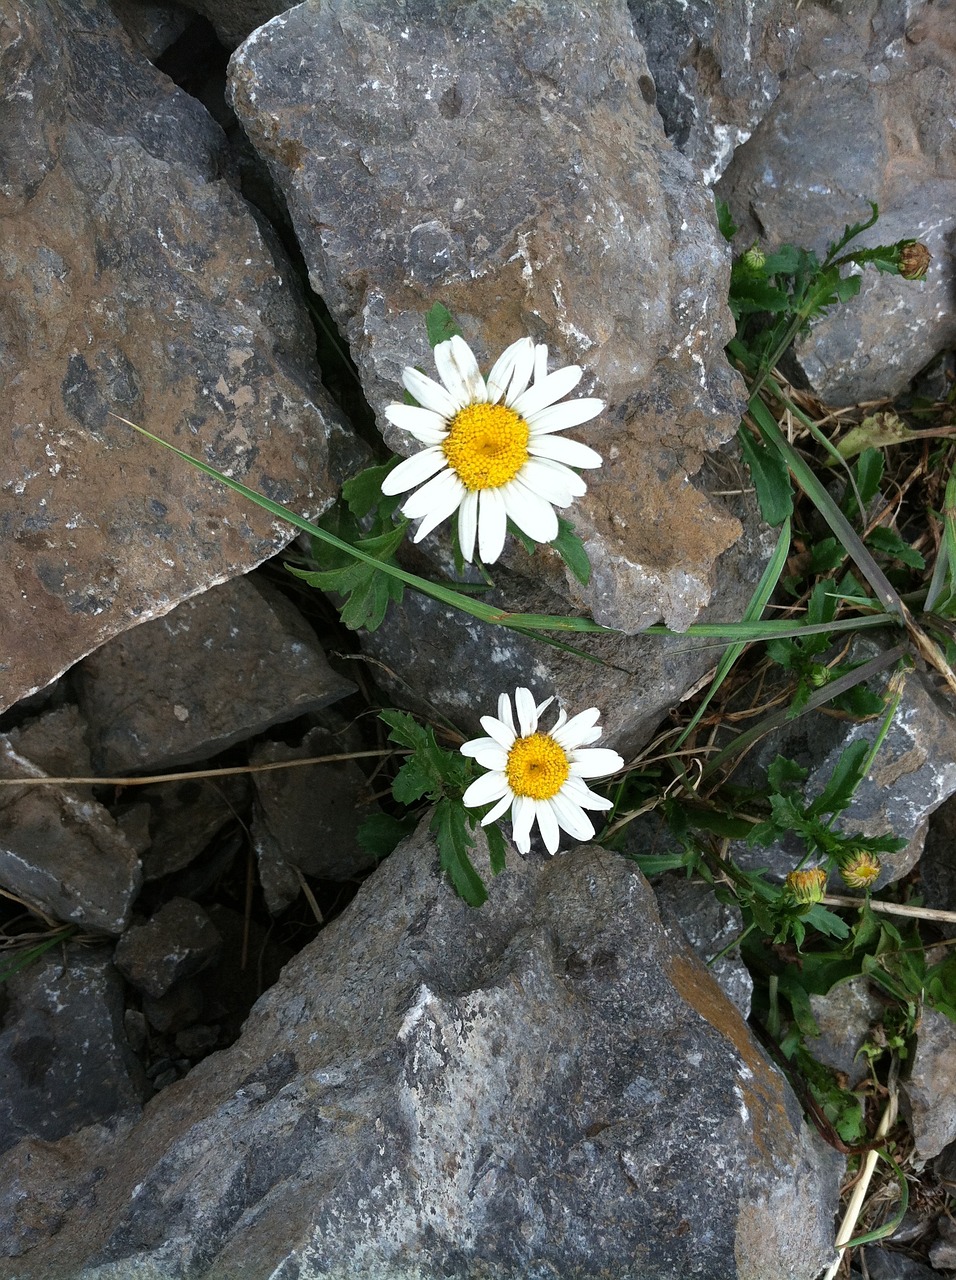 Perseverance of Daisies in Rock